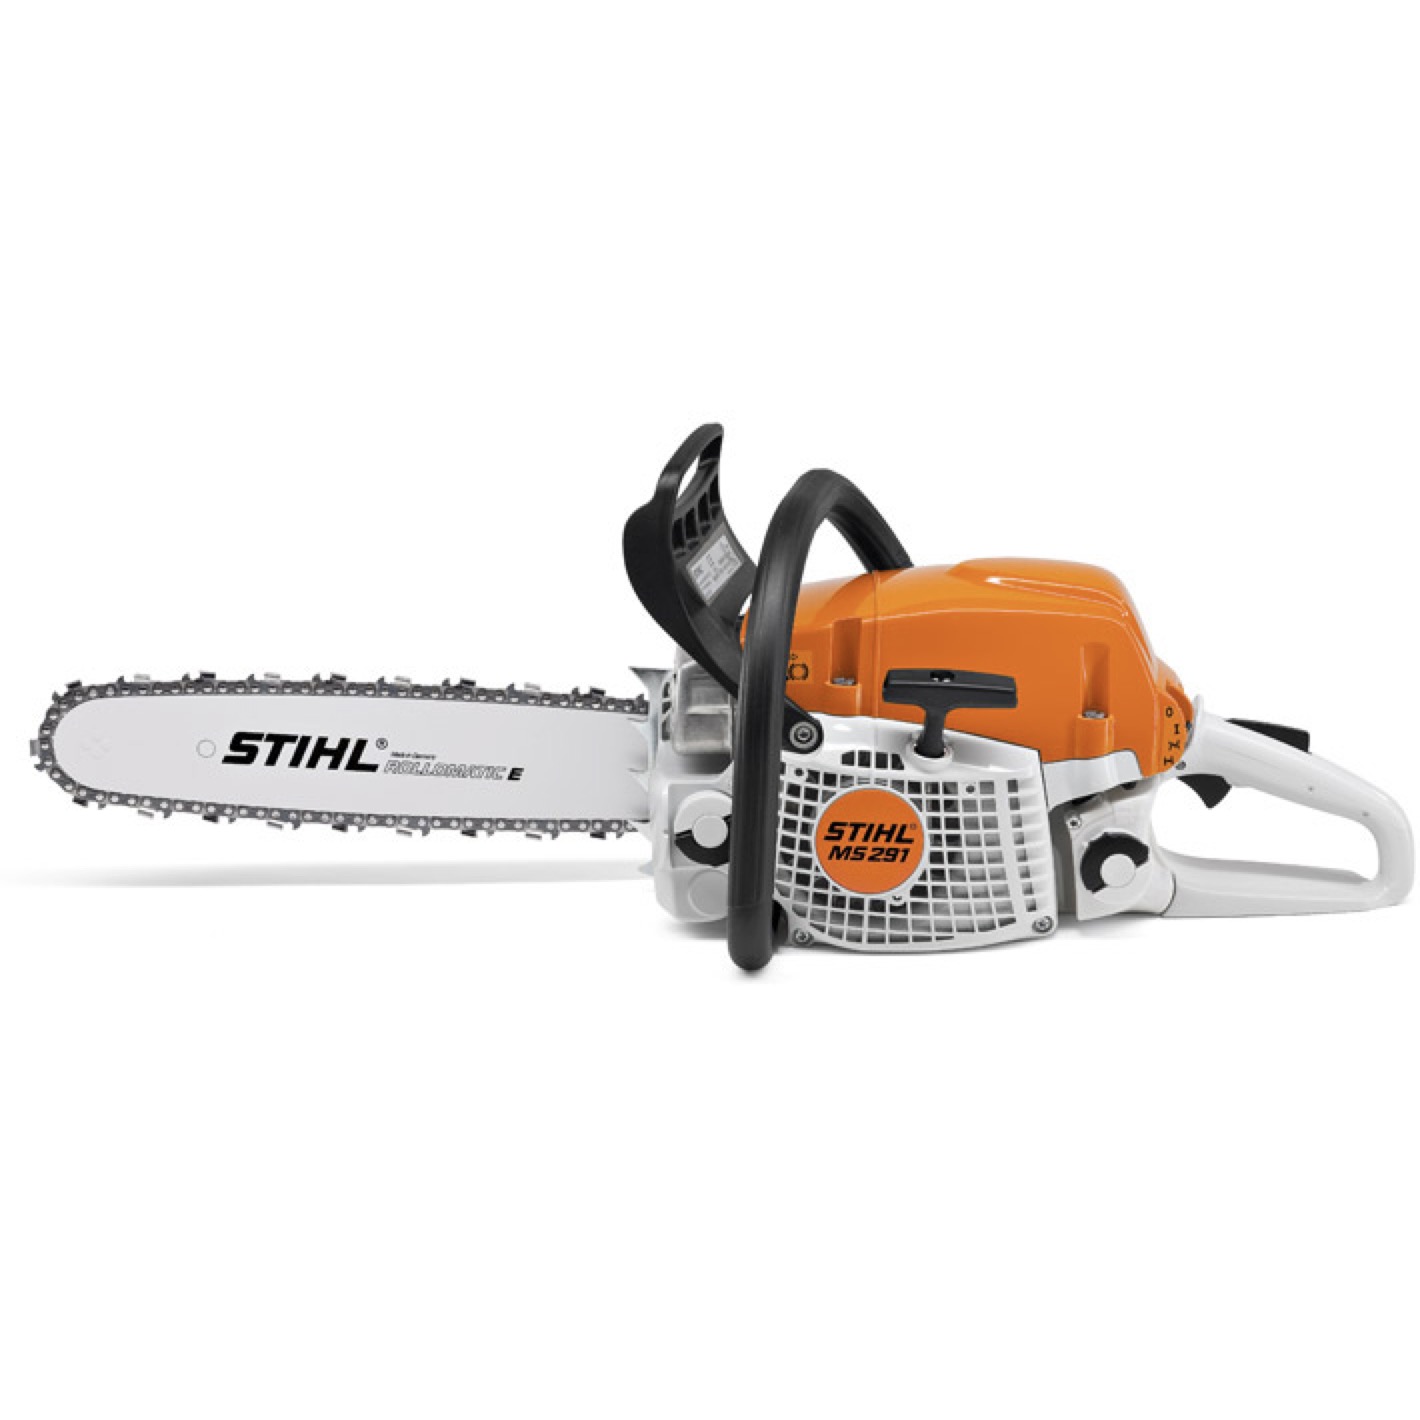 stihl-ms-291-greater-west-outdoor-power-equipment